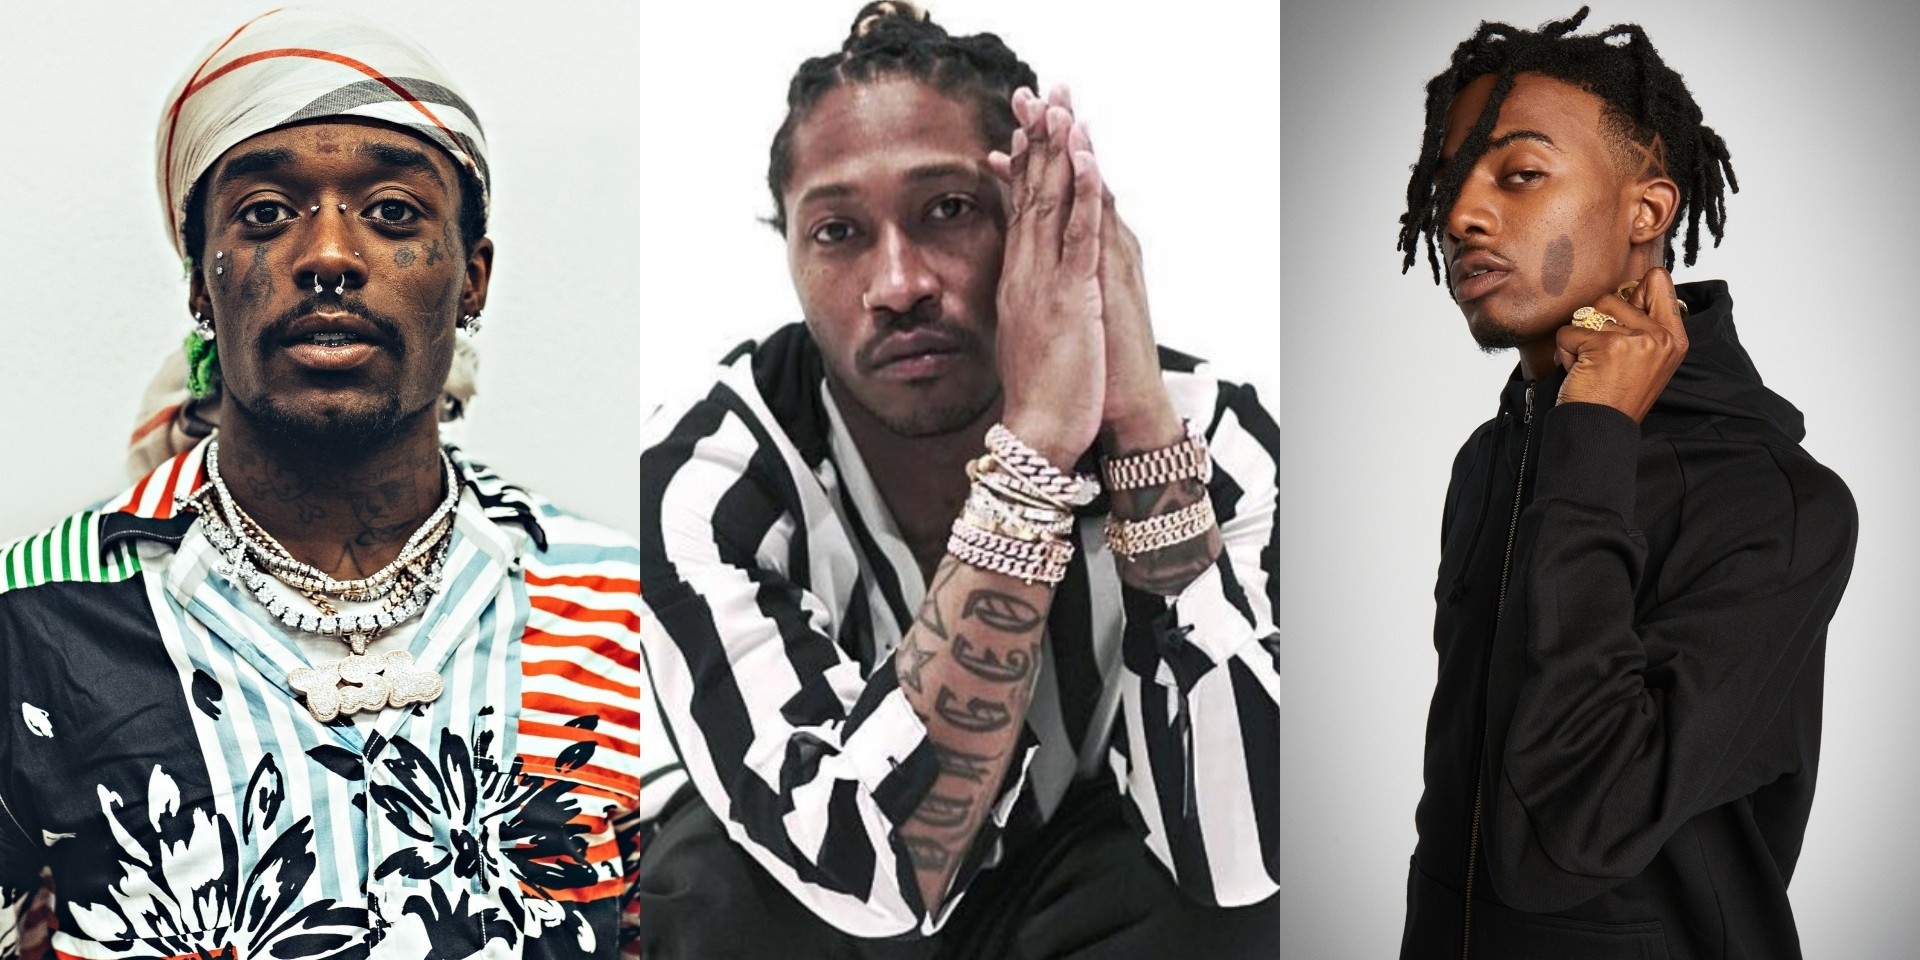 Rolling Loud Australia announces first wave lineup featuring Lil Uzi Vert, Future, Playboi Carti and more